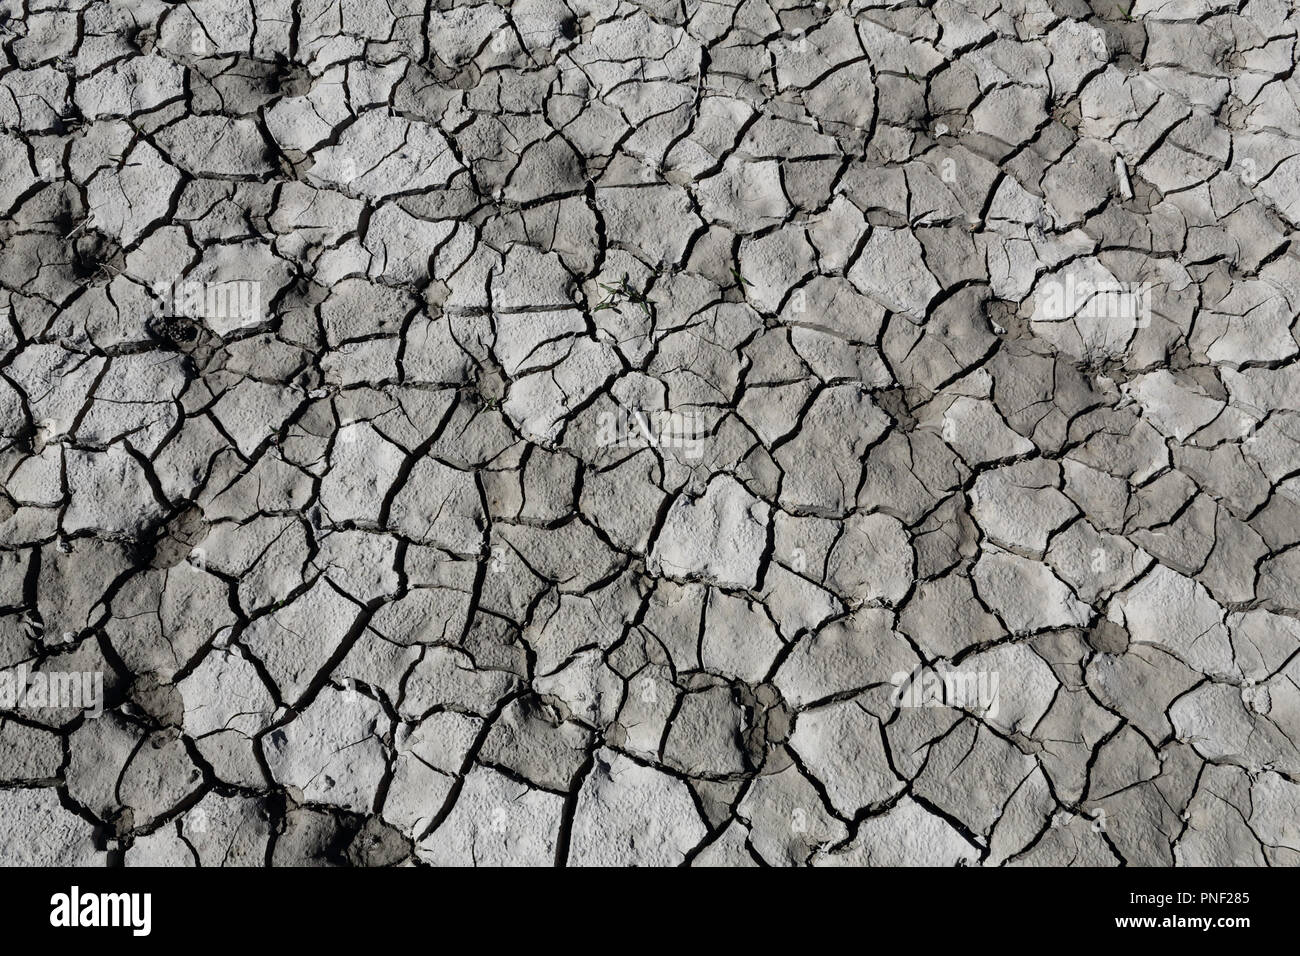 Dry cracked grey clay soil shot vertically with some dog footprints during a hot sunny day in the Mediano artifical lake in the Spanish Pyrenees Stock Photo